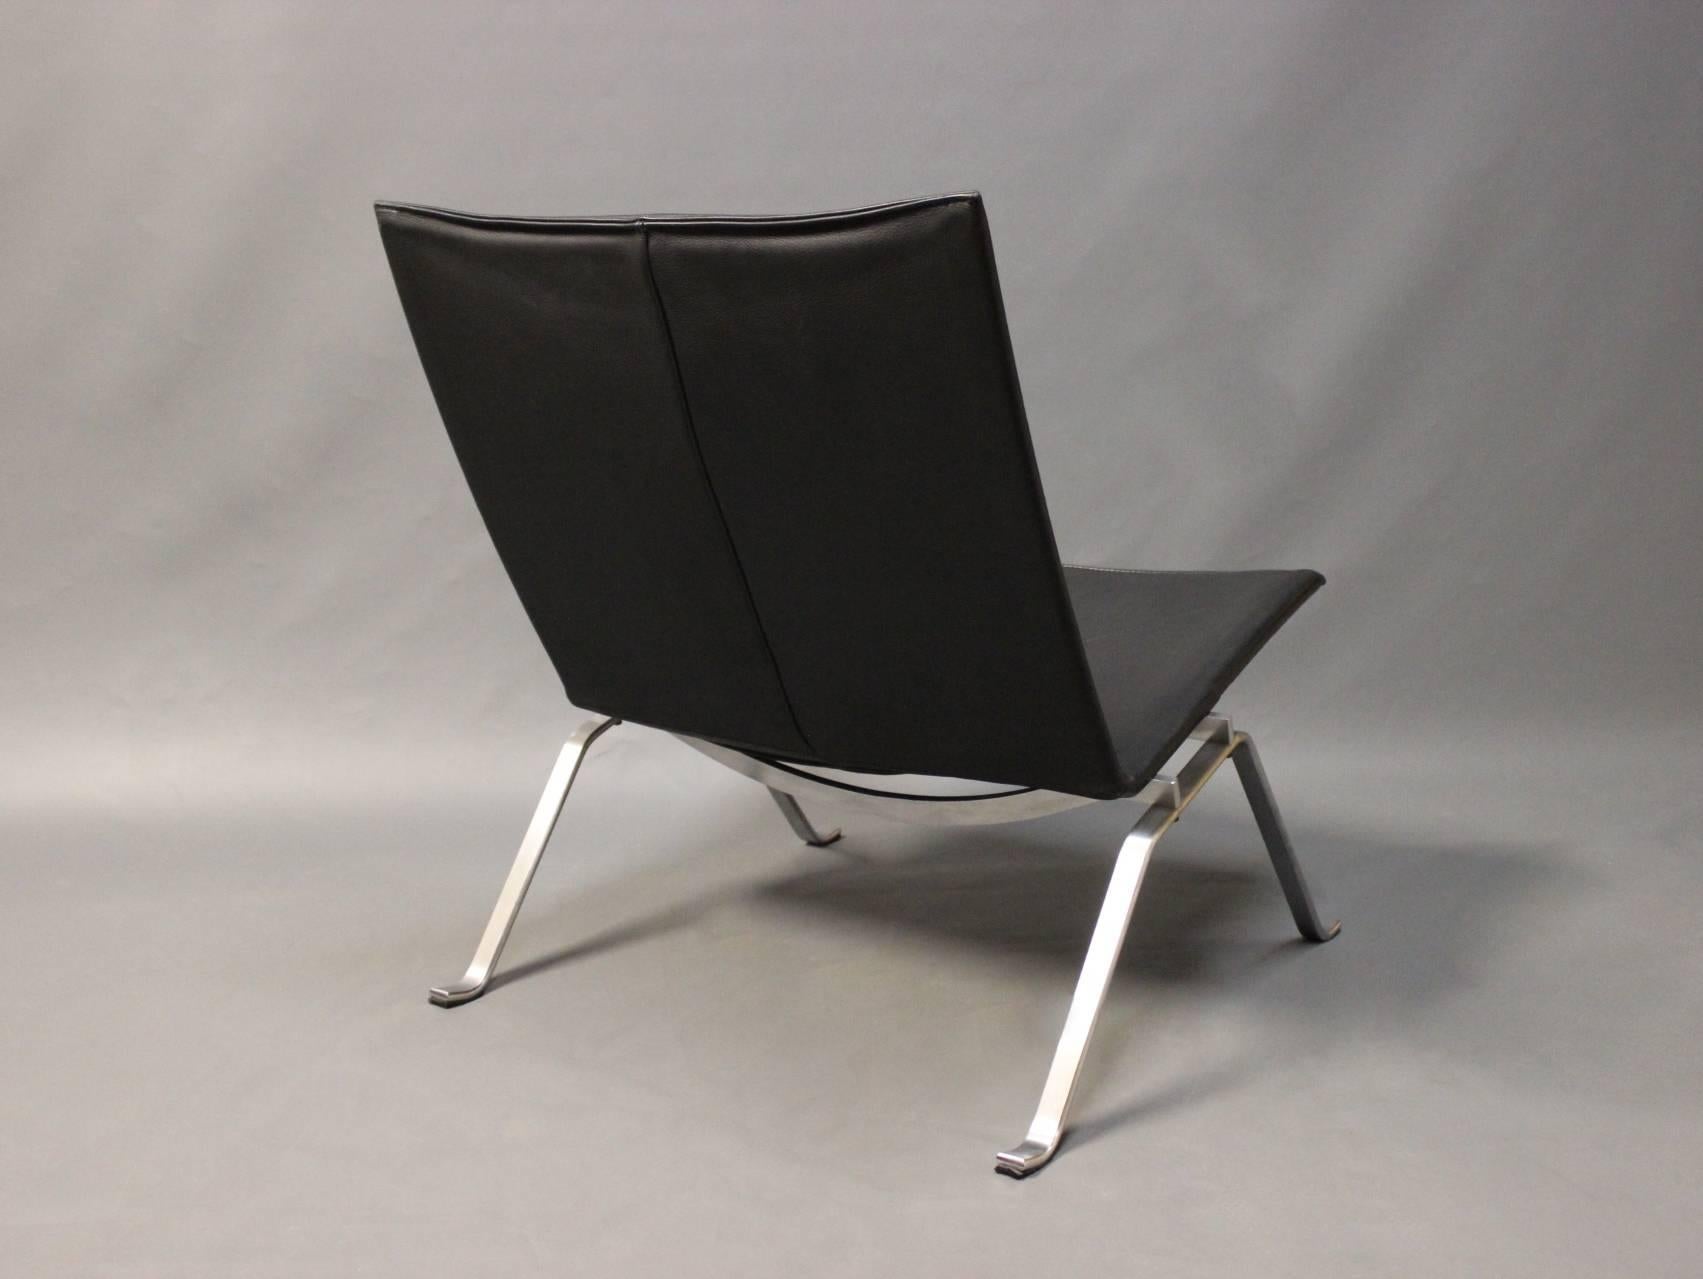 Danish Pair of PK22 Chairs by Poul Kjærholm and Fritz Hansen, 1989